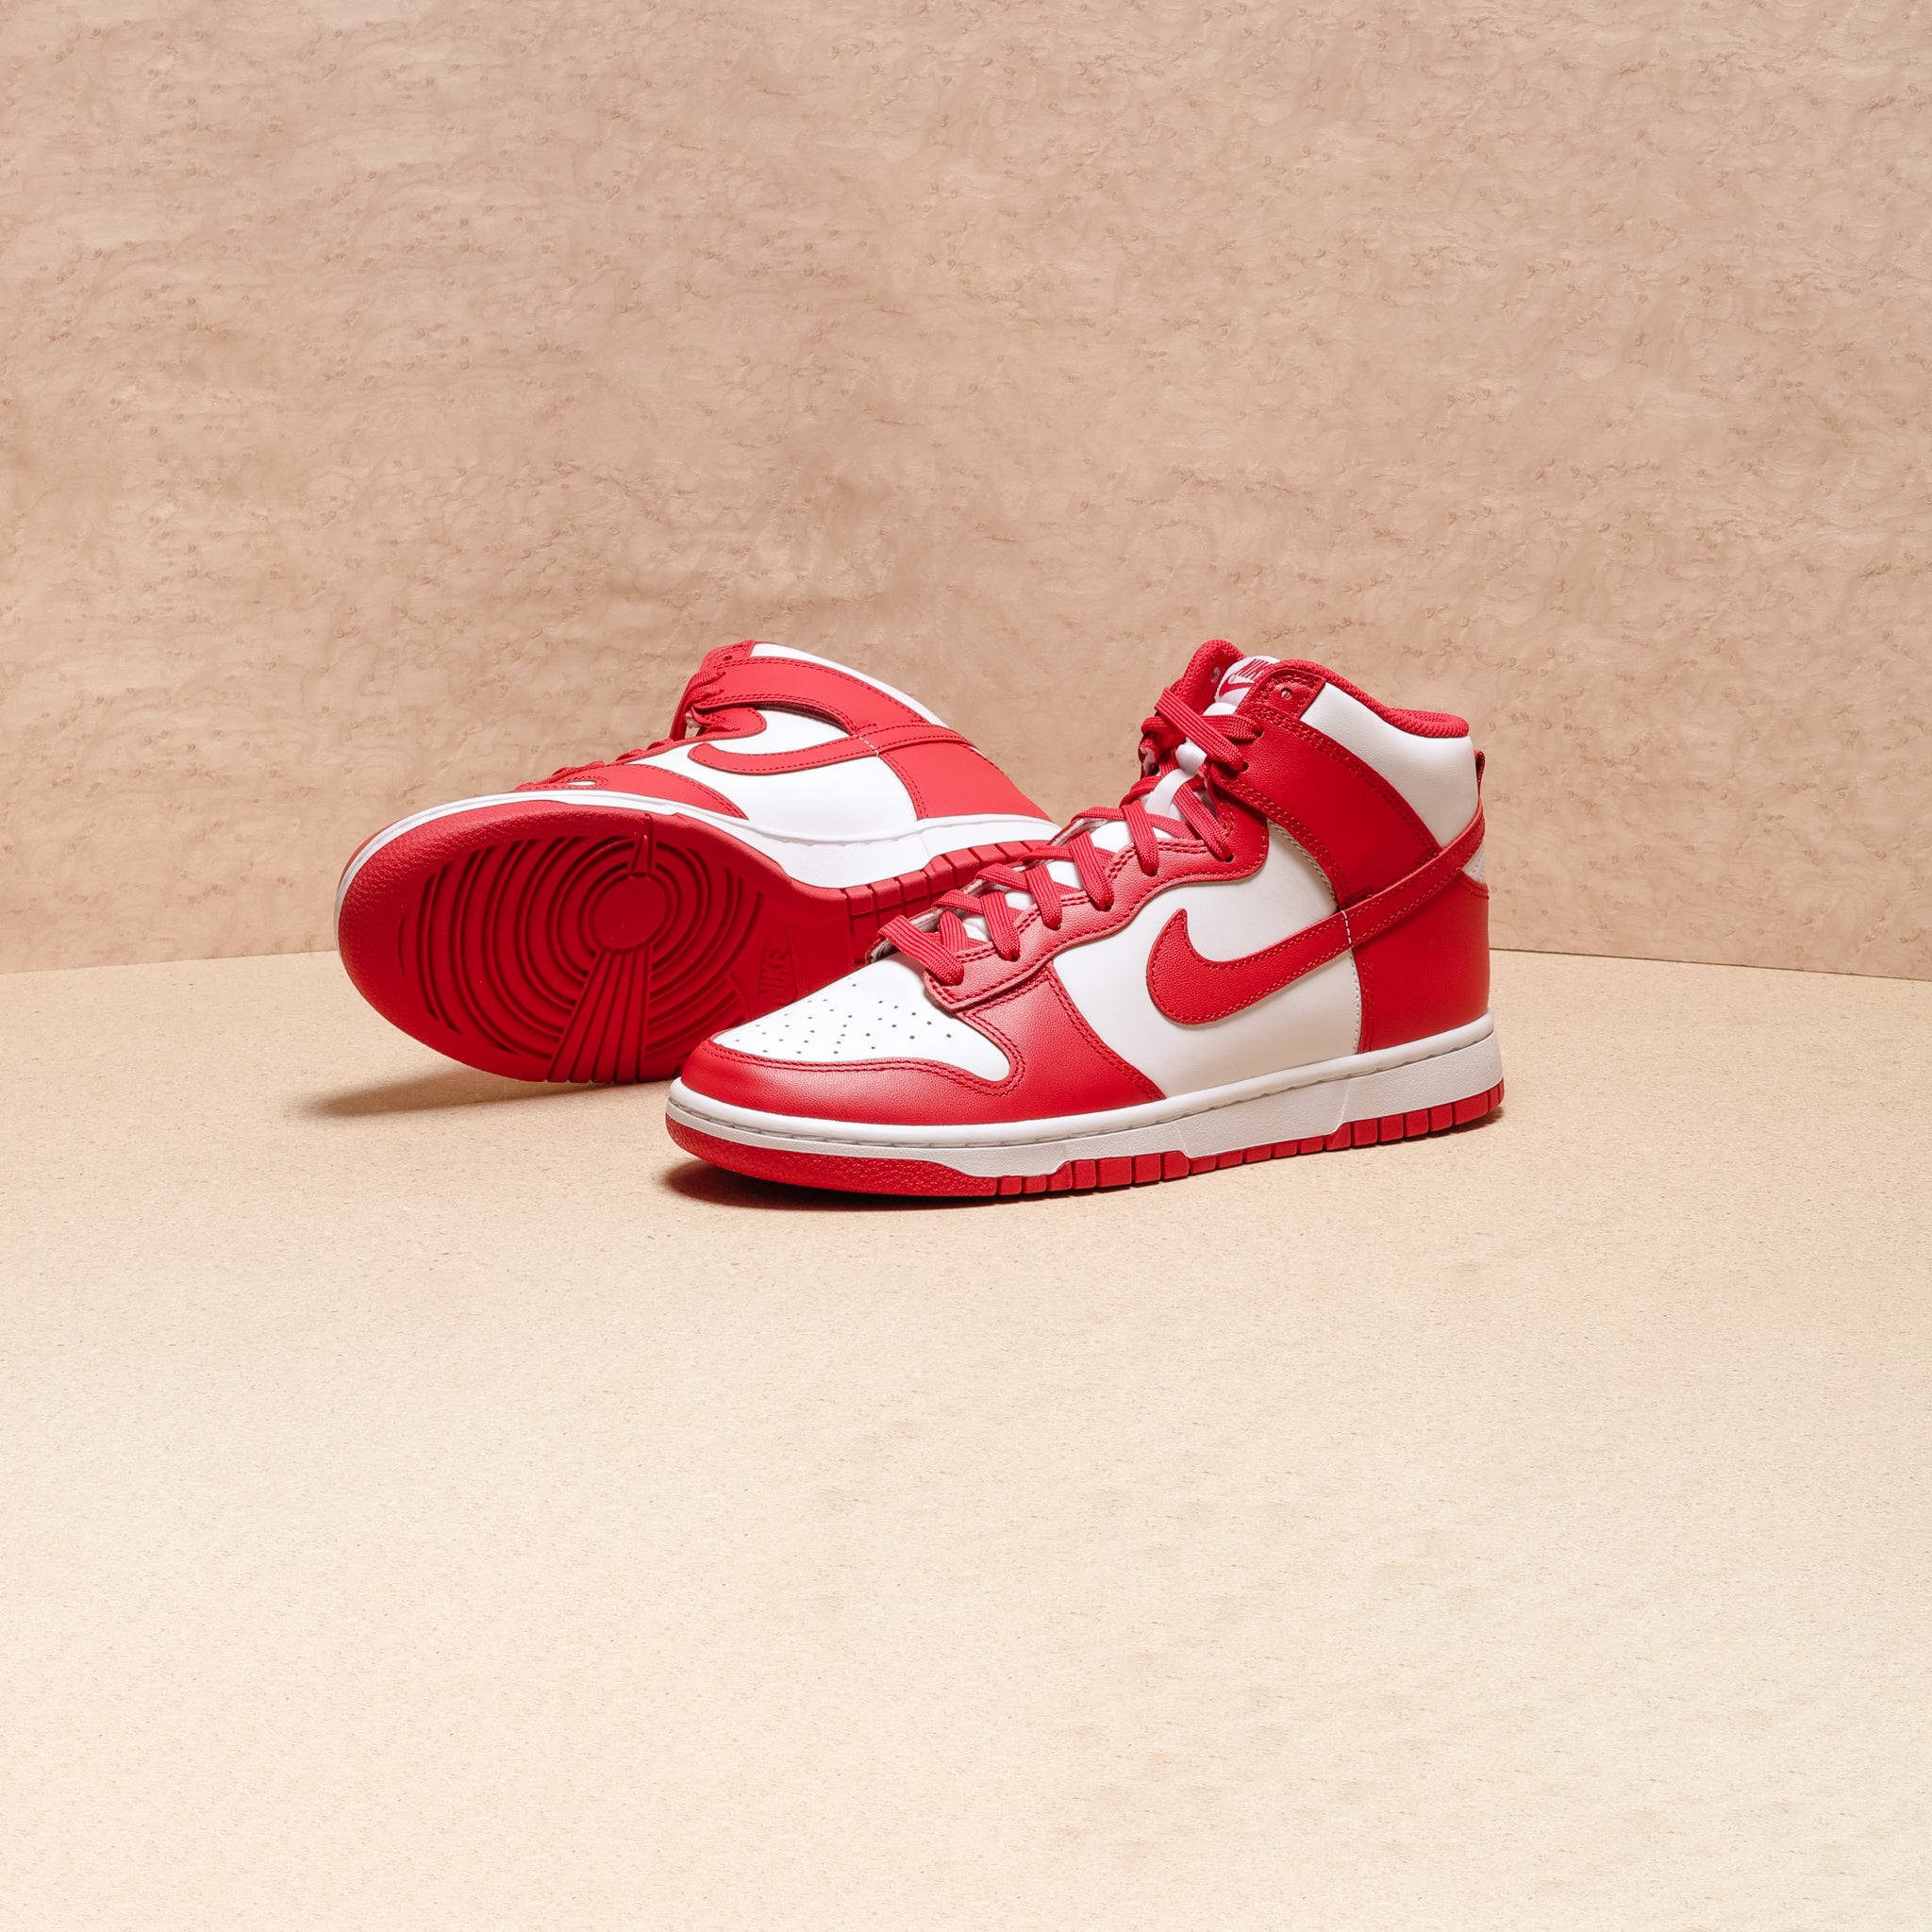 Nike Dunk High Retro “Championship White Red” – The Darkside 